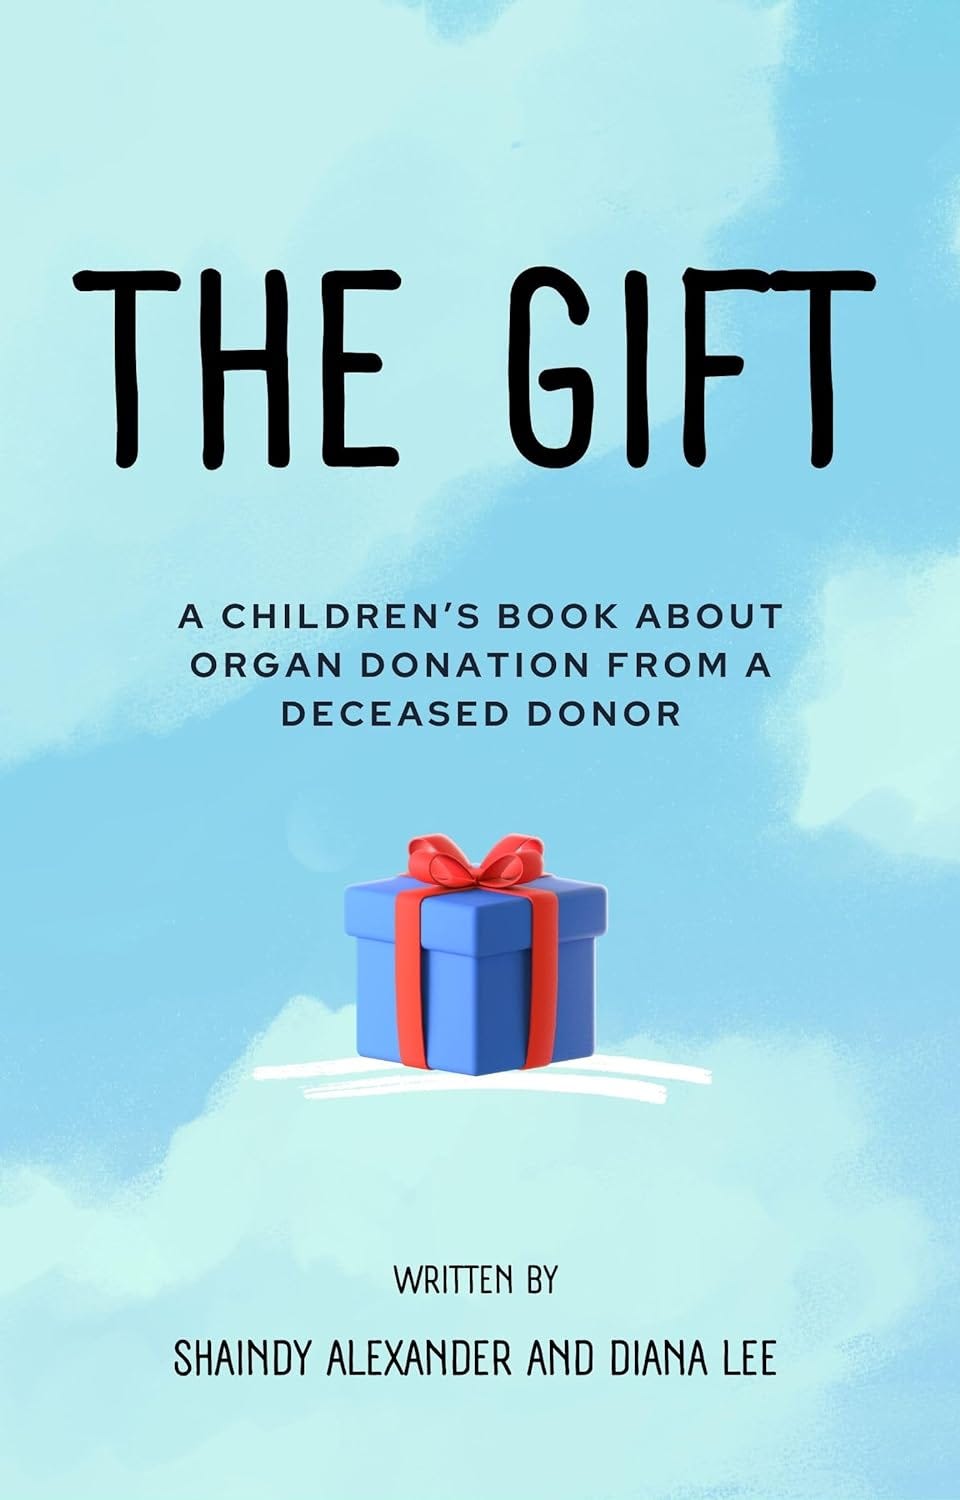 May be a graphic of text that says 'THE GIFT A CHILDREN'S BOOK ABOUT ORGAN DONATION FROM A DECEASED DONOR WRITTEN BY SHAINDY ALEXANDER AND DIANA LEE'